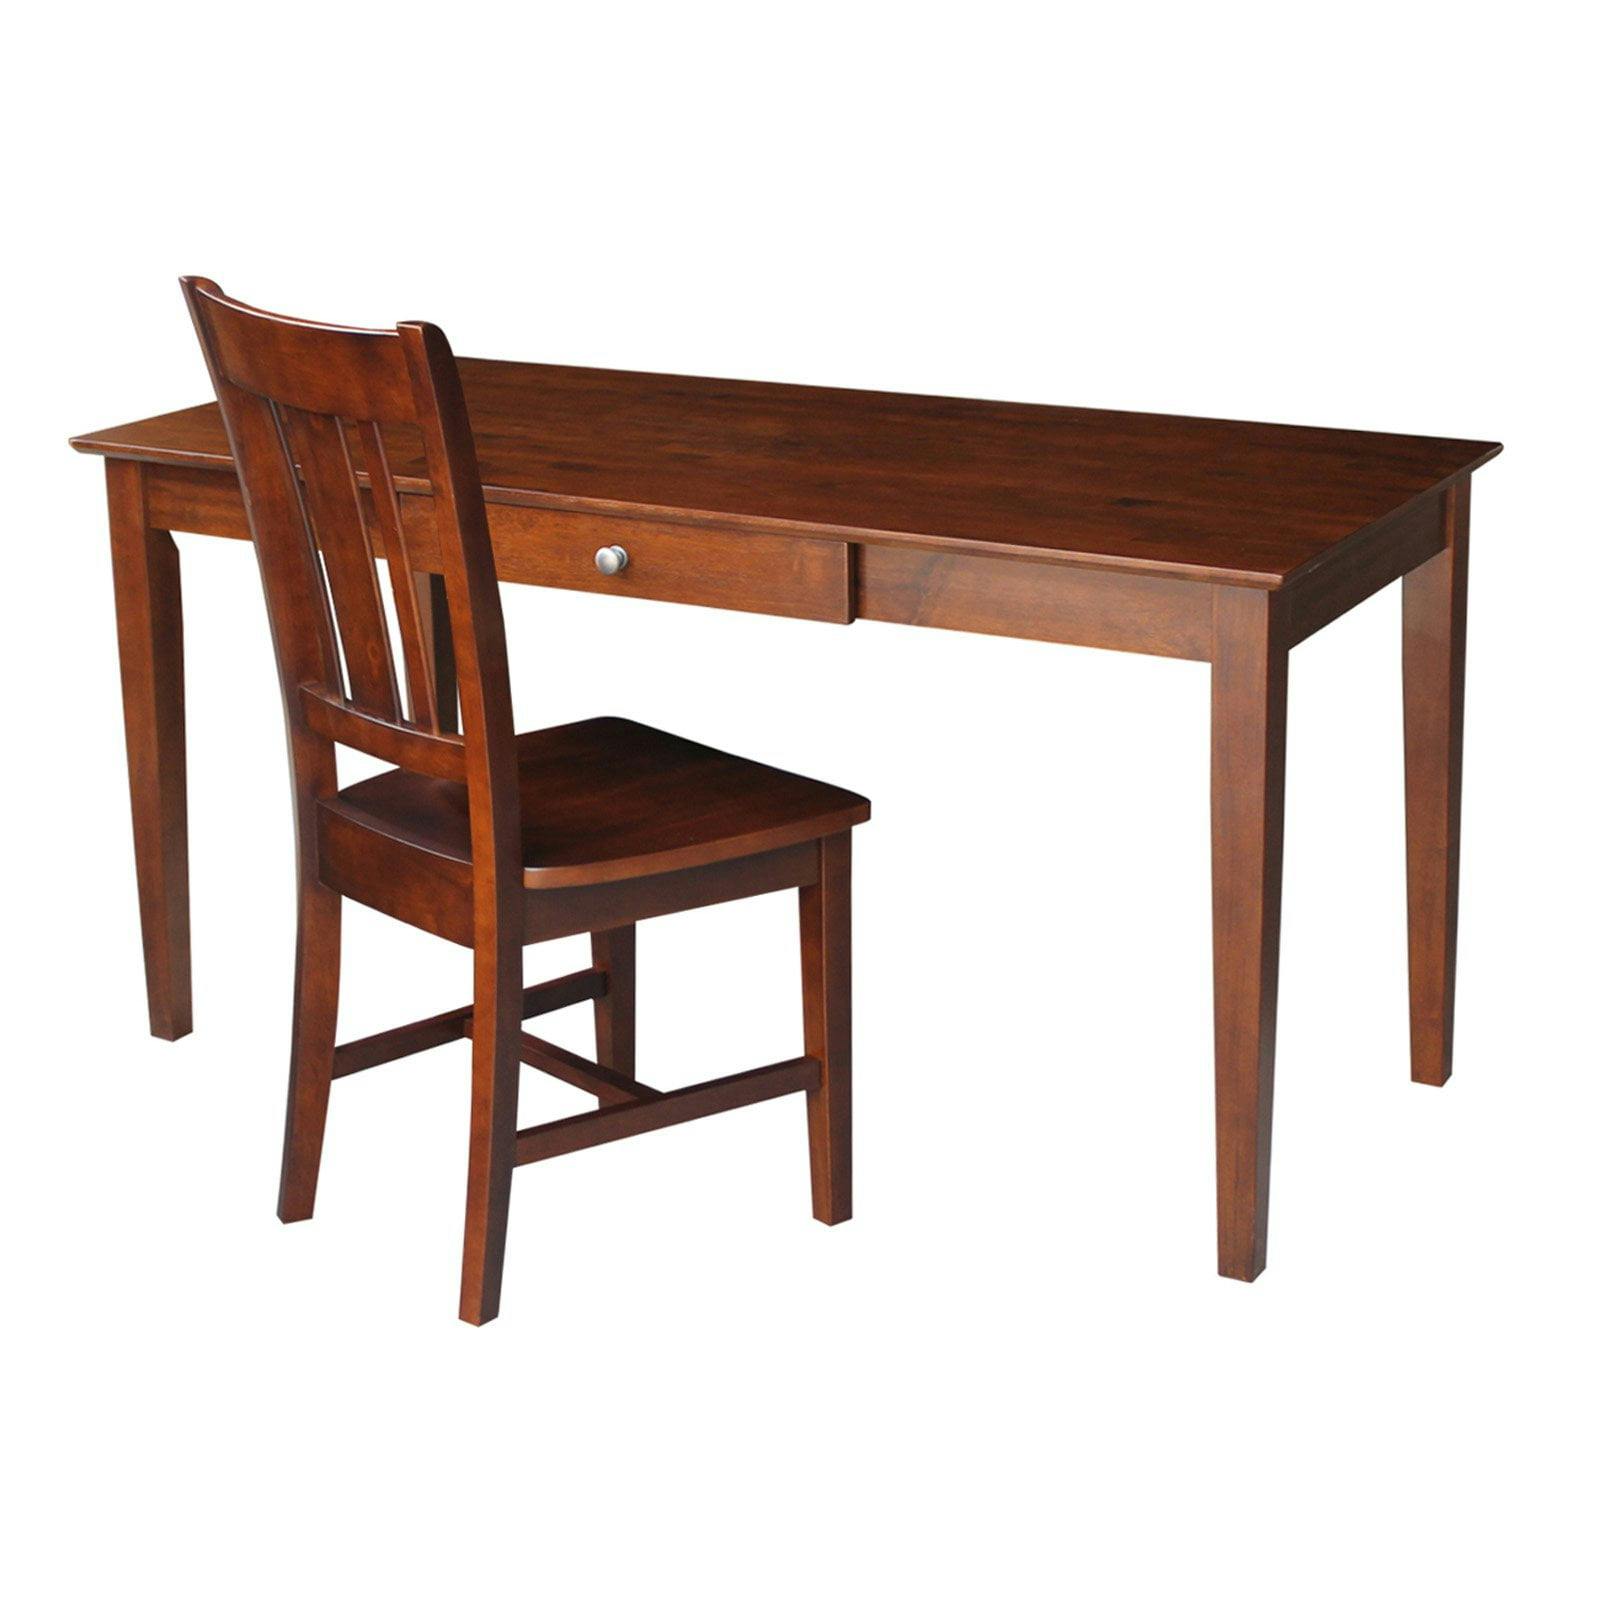 Espresso Rubberwood Desk with Drawer and Matching Chair Set